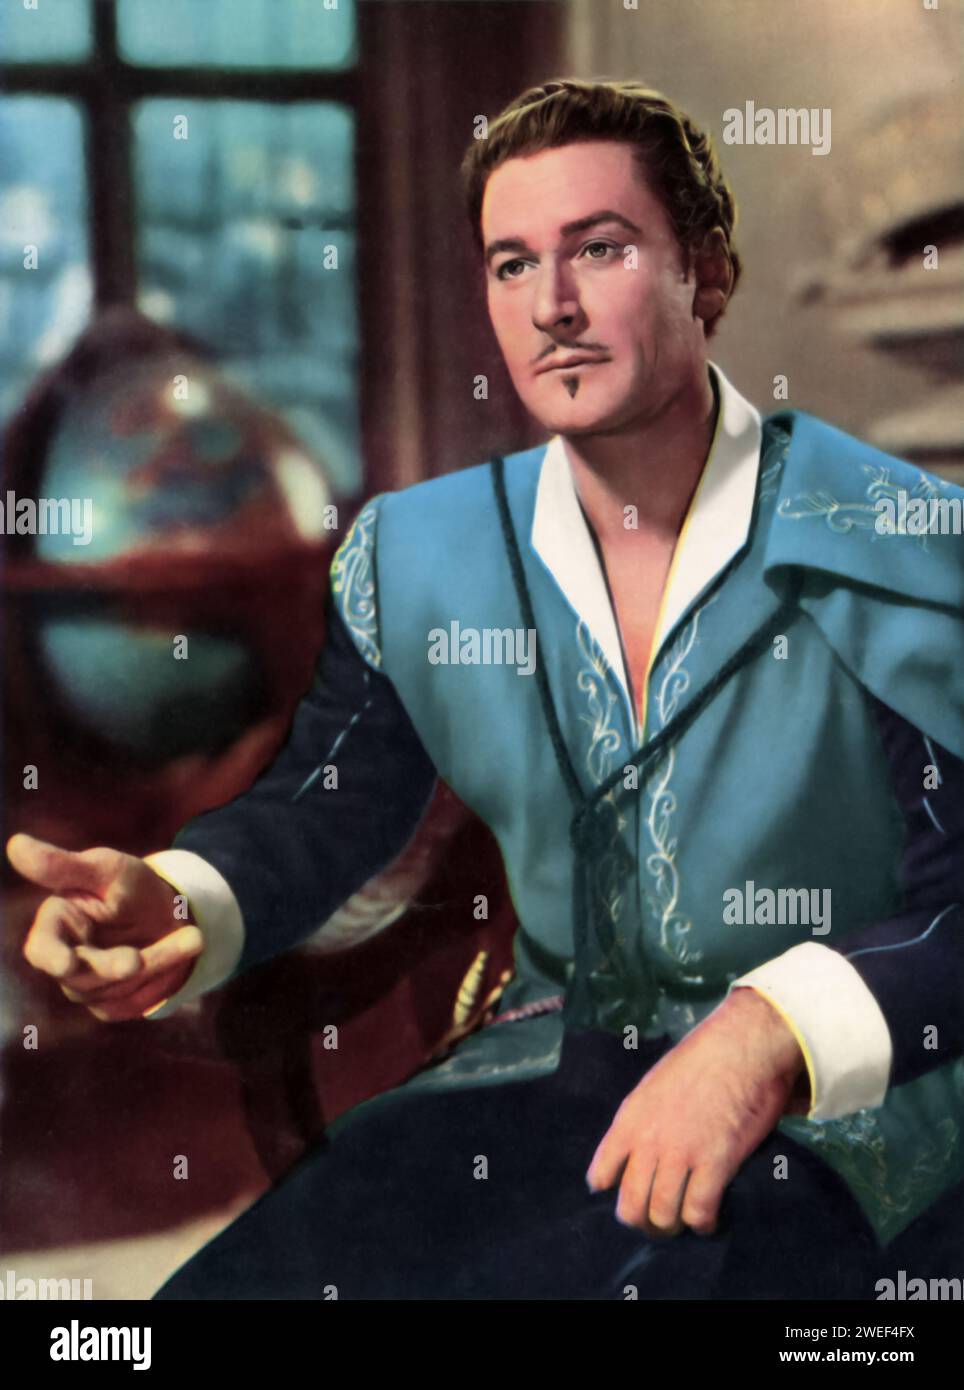 Errol Flynn stars in 'Adventures of Don Juan' (1948), a swashbuckling adventure film that showcases Flynn's charisma and athleticism. In this movie, Flynn plays the legendary lover and swordsman Don Juan, embarking on daring escapades and romantic conquests in the Spanish court. Stock Photo